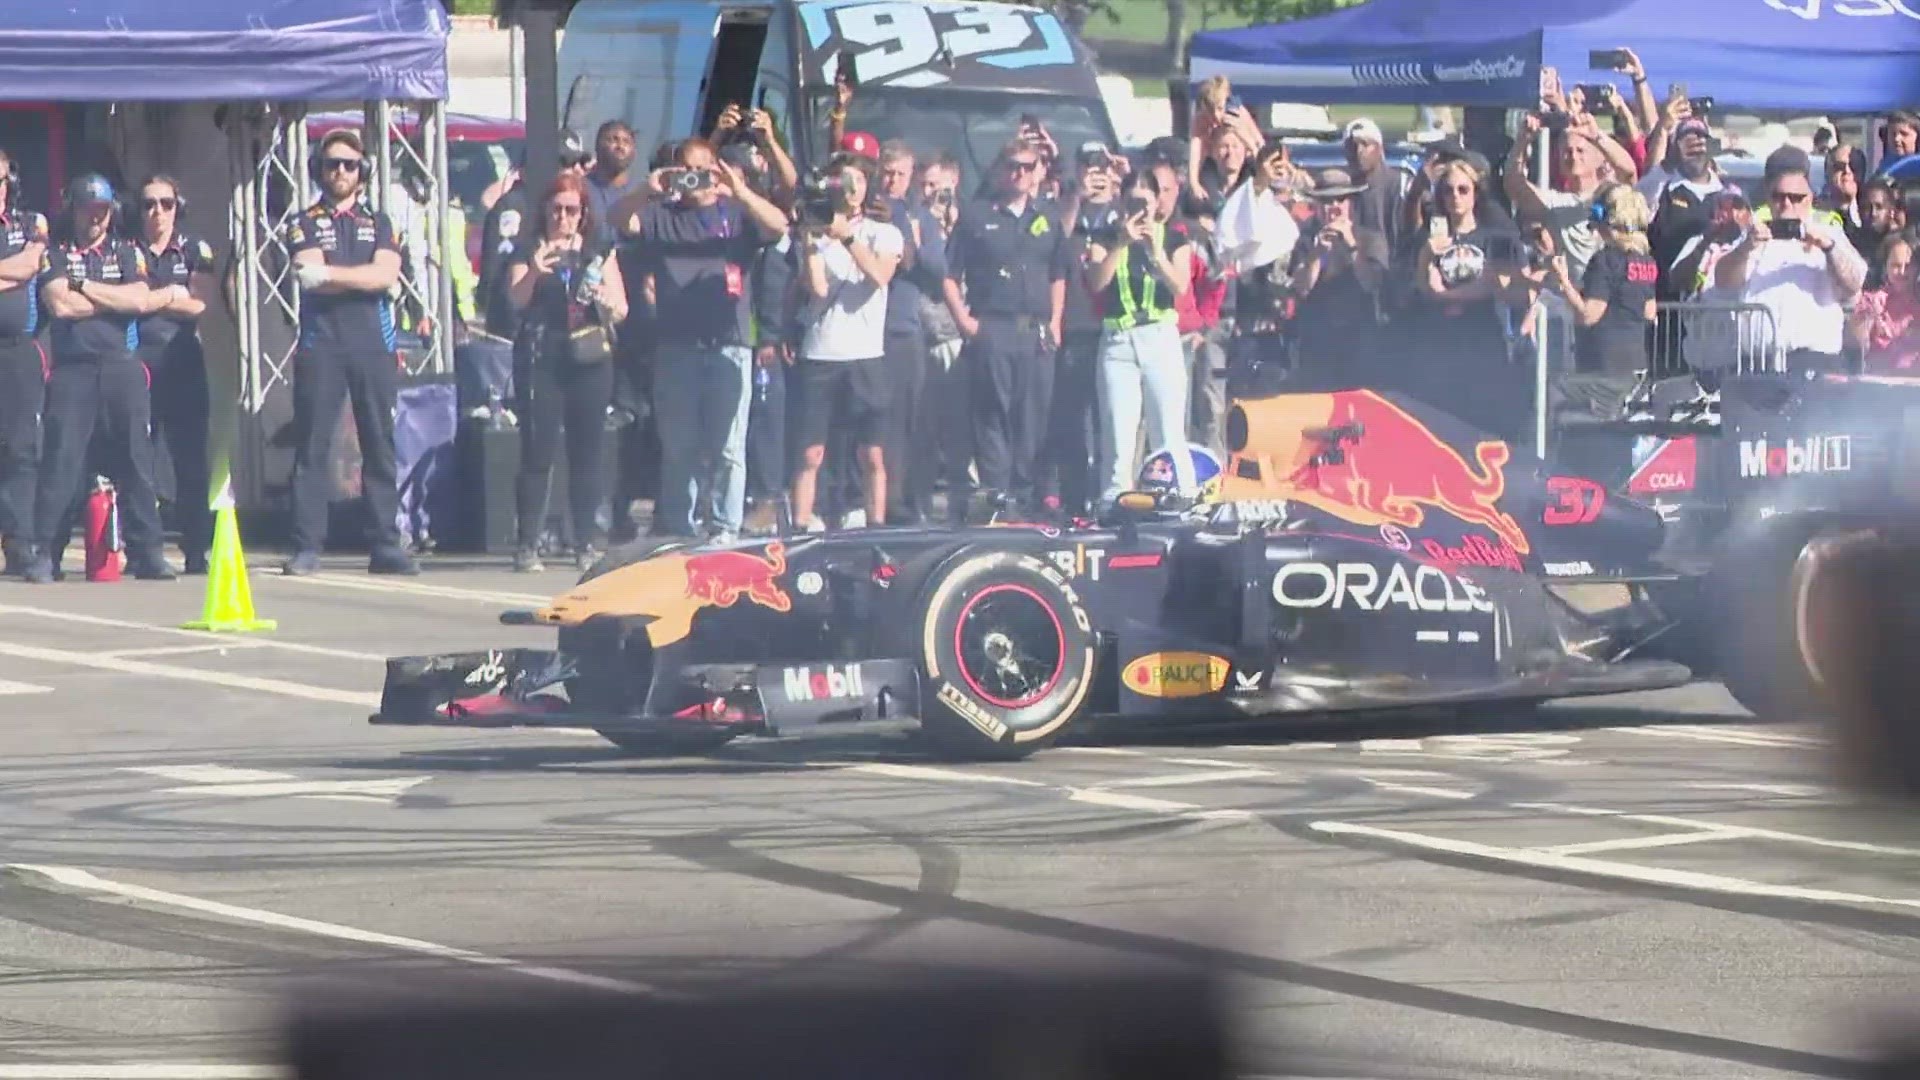 Fans gathered along Pennsylvania Ave. to watch a Formula 1 car roar down the street, Saturday evening as part of the Red Bull Racing Showrun in the District.